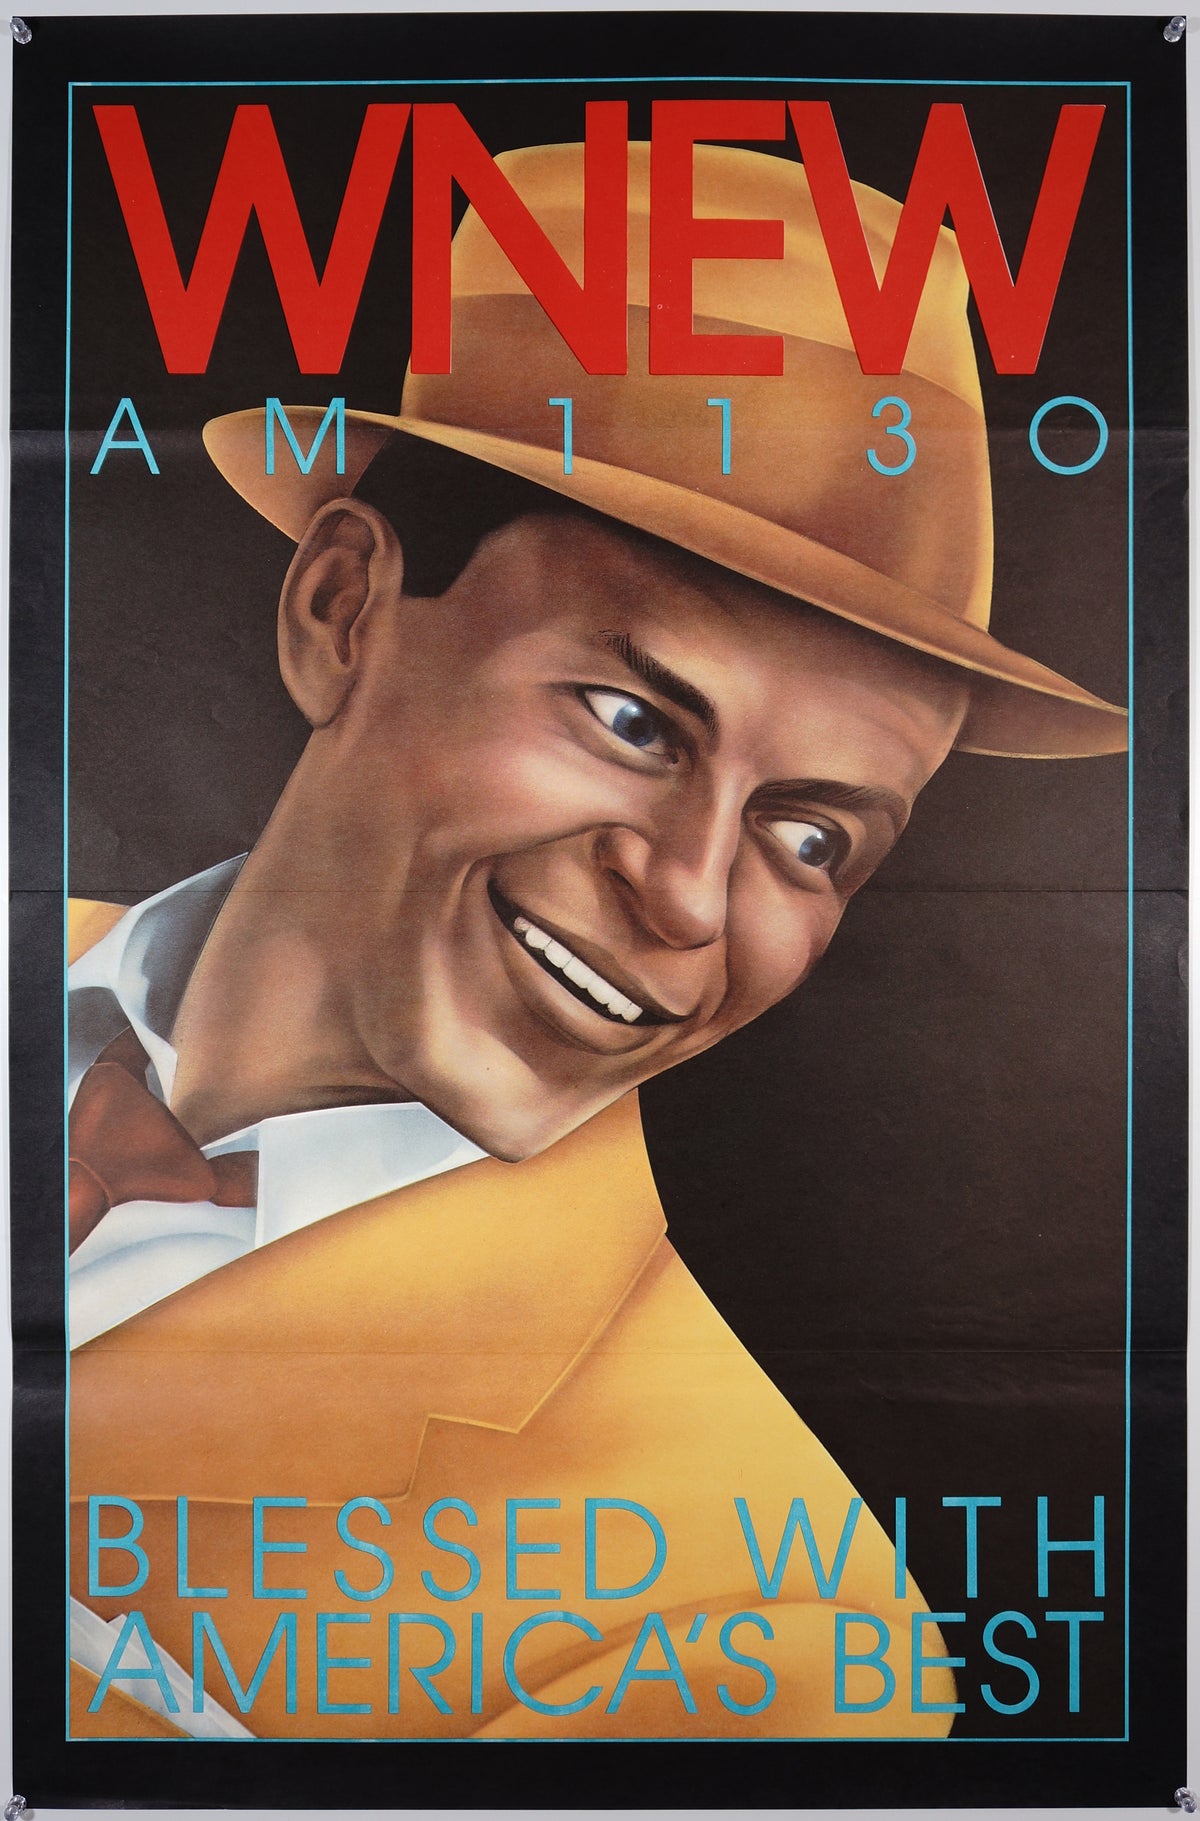 WNEW- Frank Sinatra - Authentic Vintage Poster